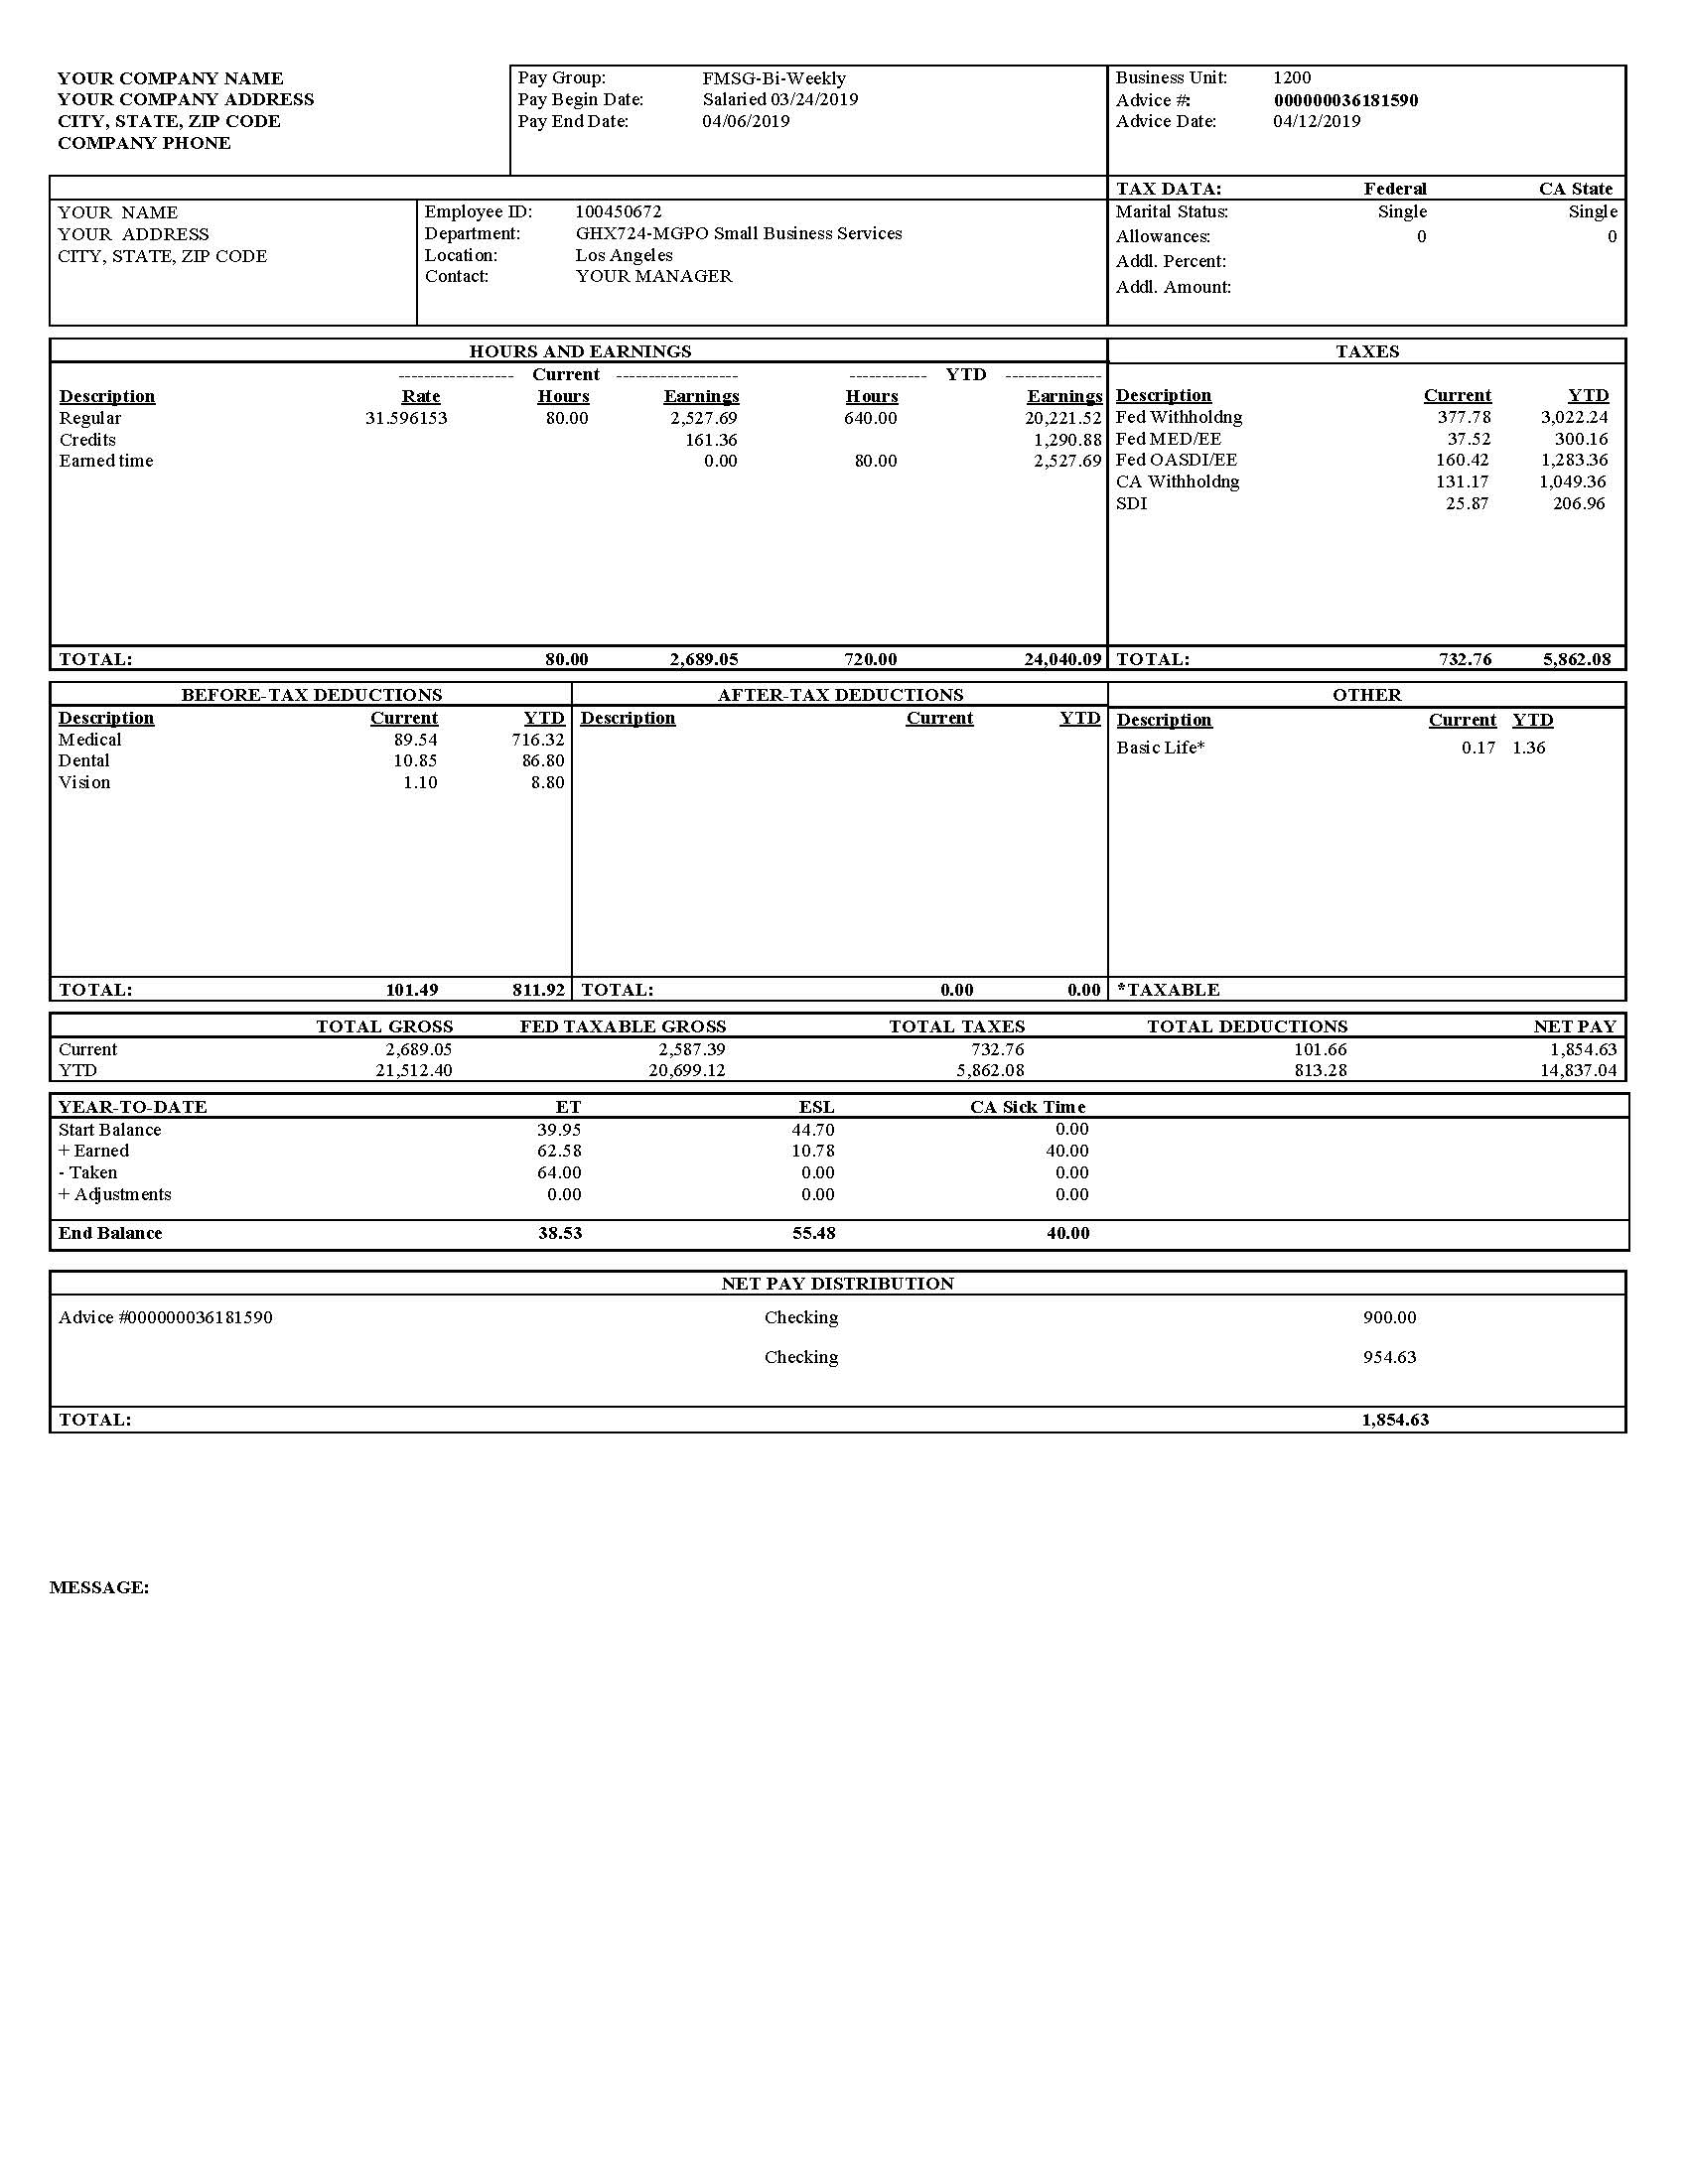 Pay Stub Template For Small Business from www.speedystub.com